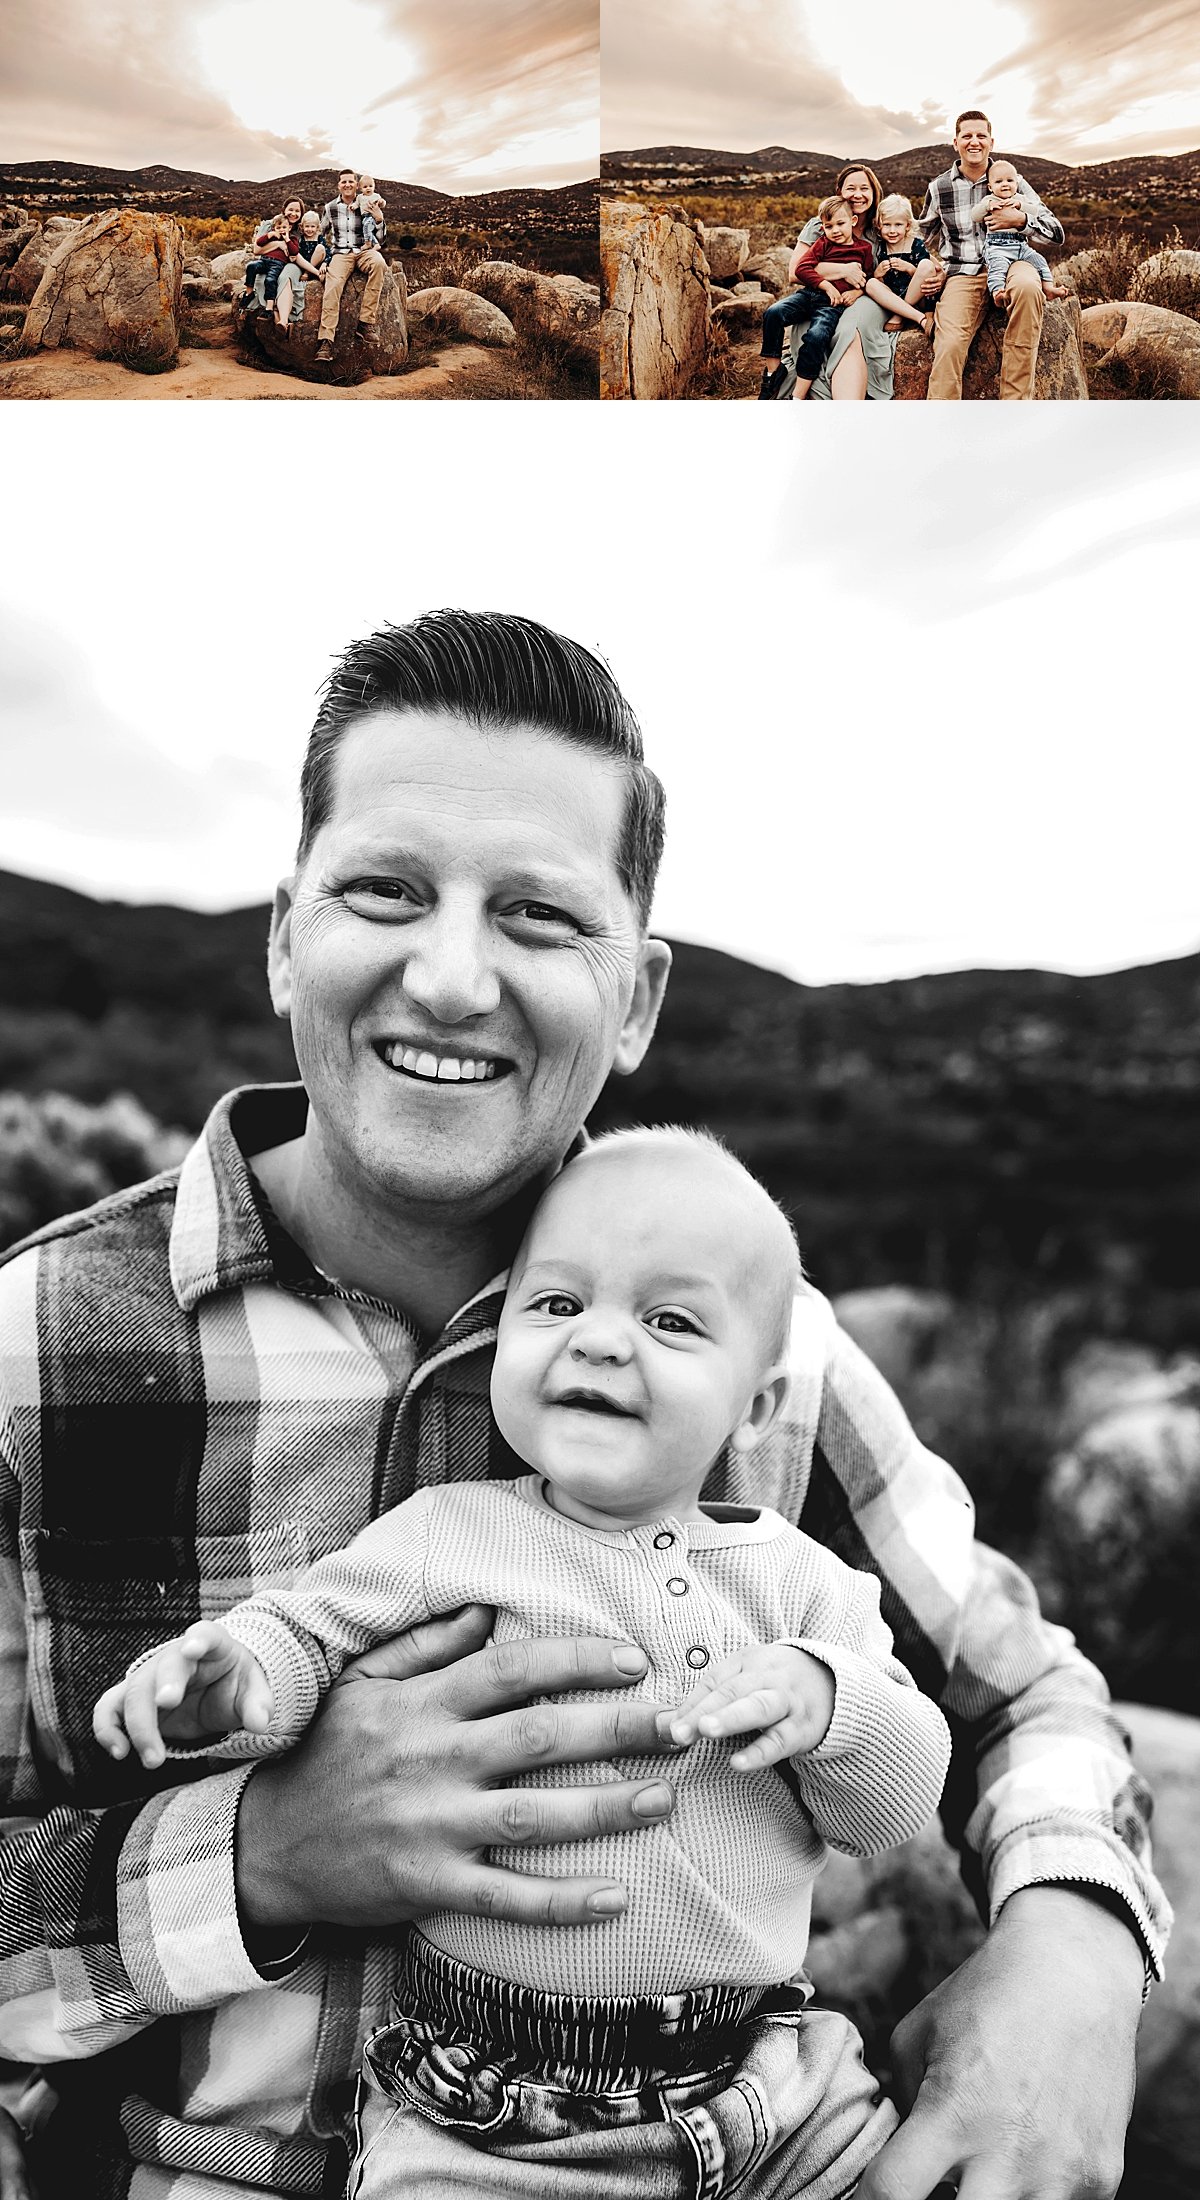  dad holding youngest kid sitting on the rocks in jeans by Colorado photographer 